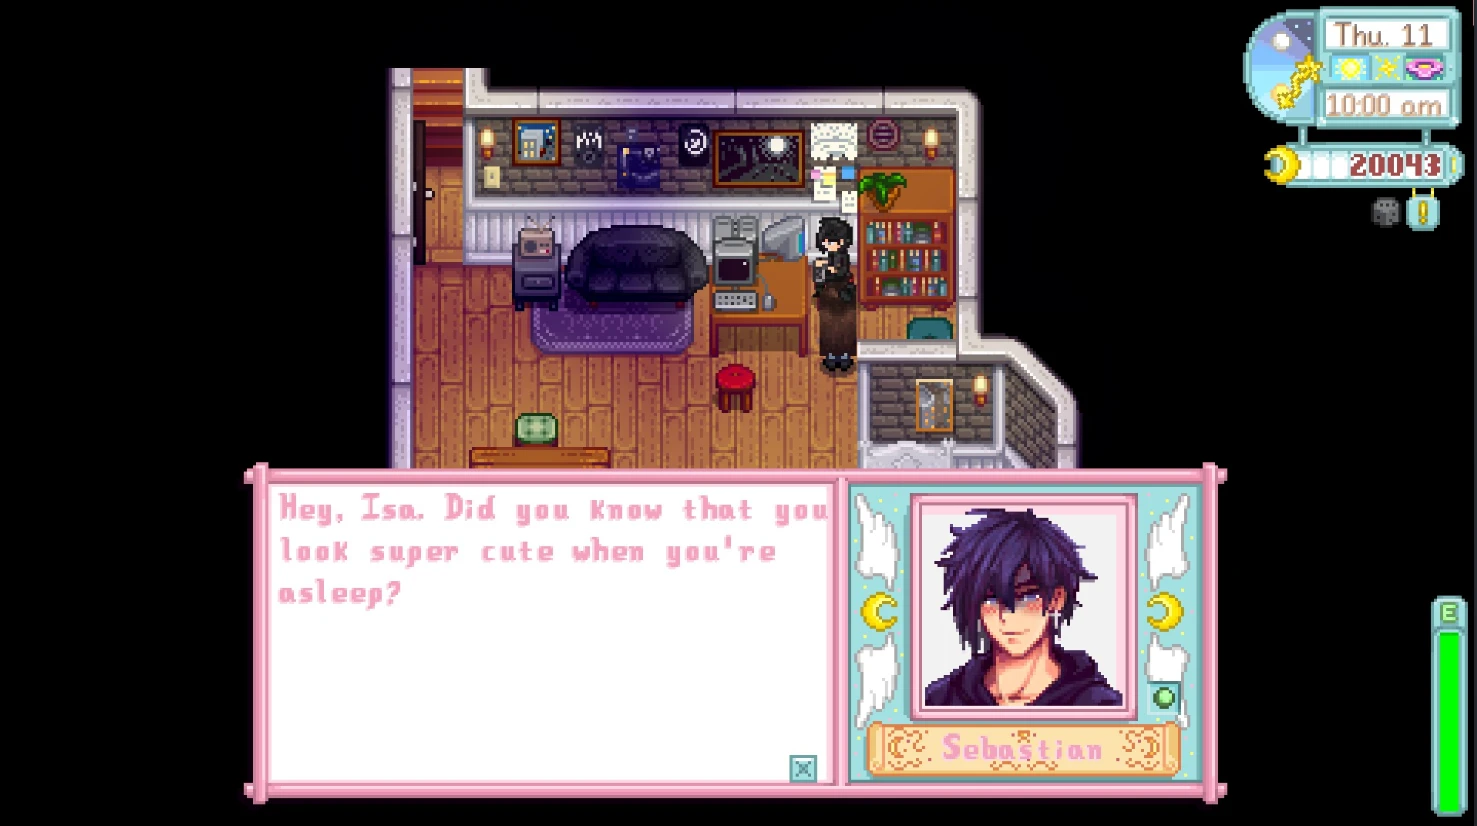 Isas Yandere Sebastian Dialogue Expansion At Stardew Valley Nexus All in on...